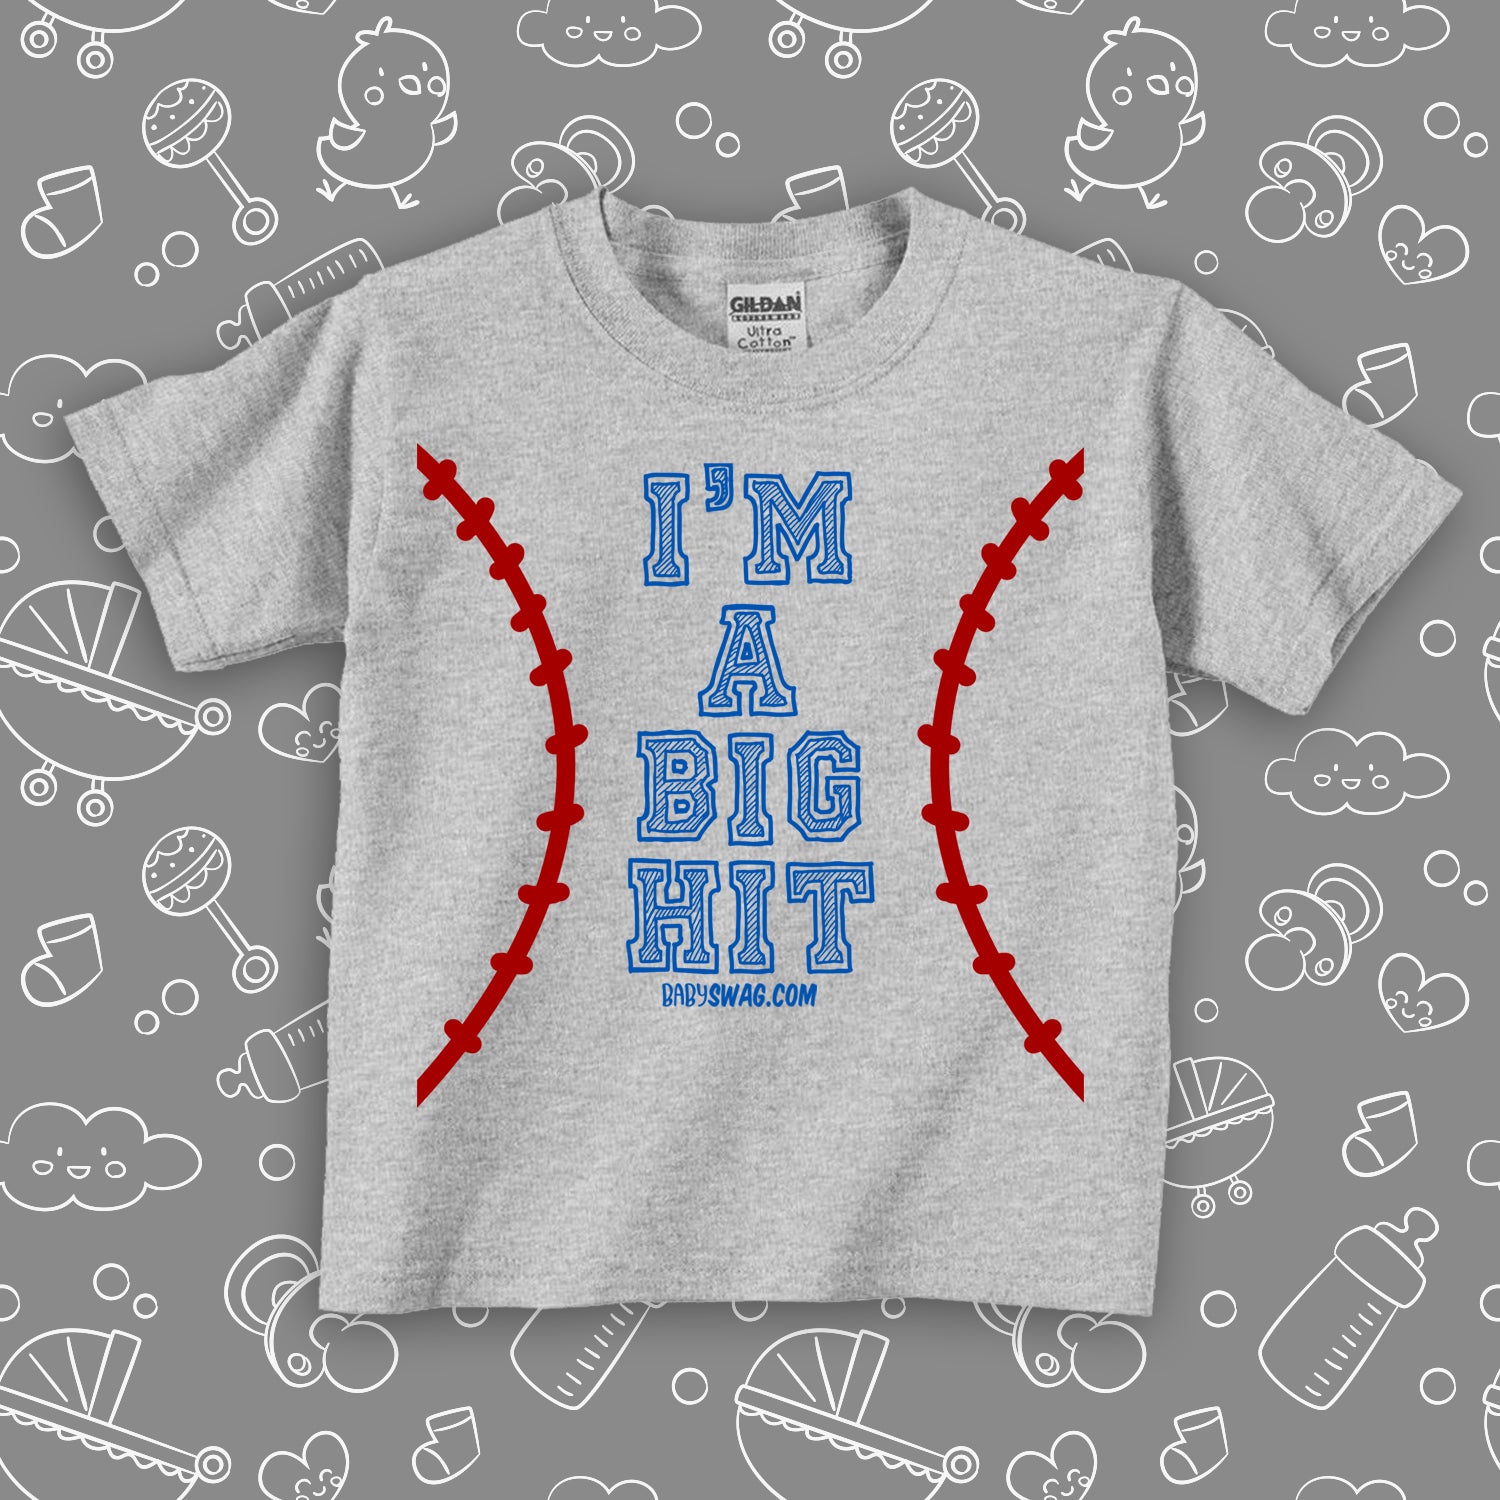 Funny toddler boy shirt with saying "I'm A Big Hit" in grey. 